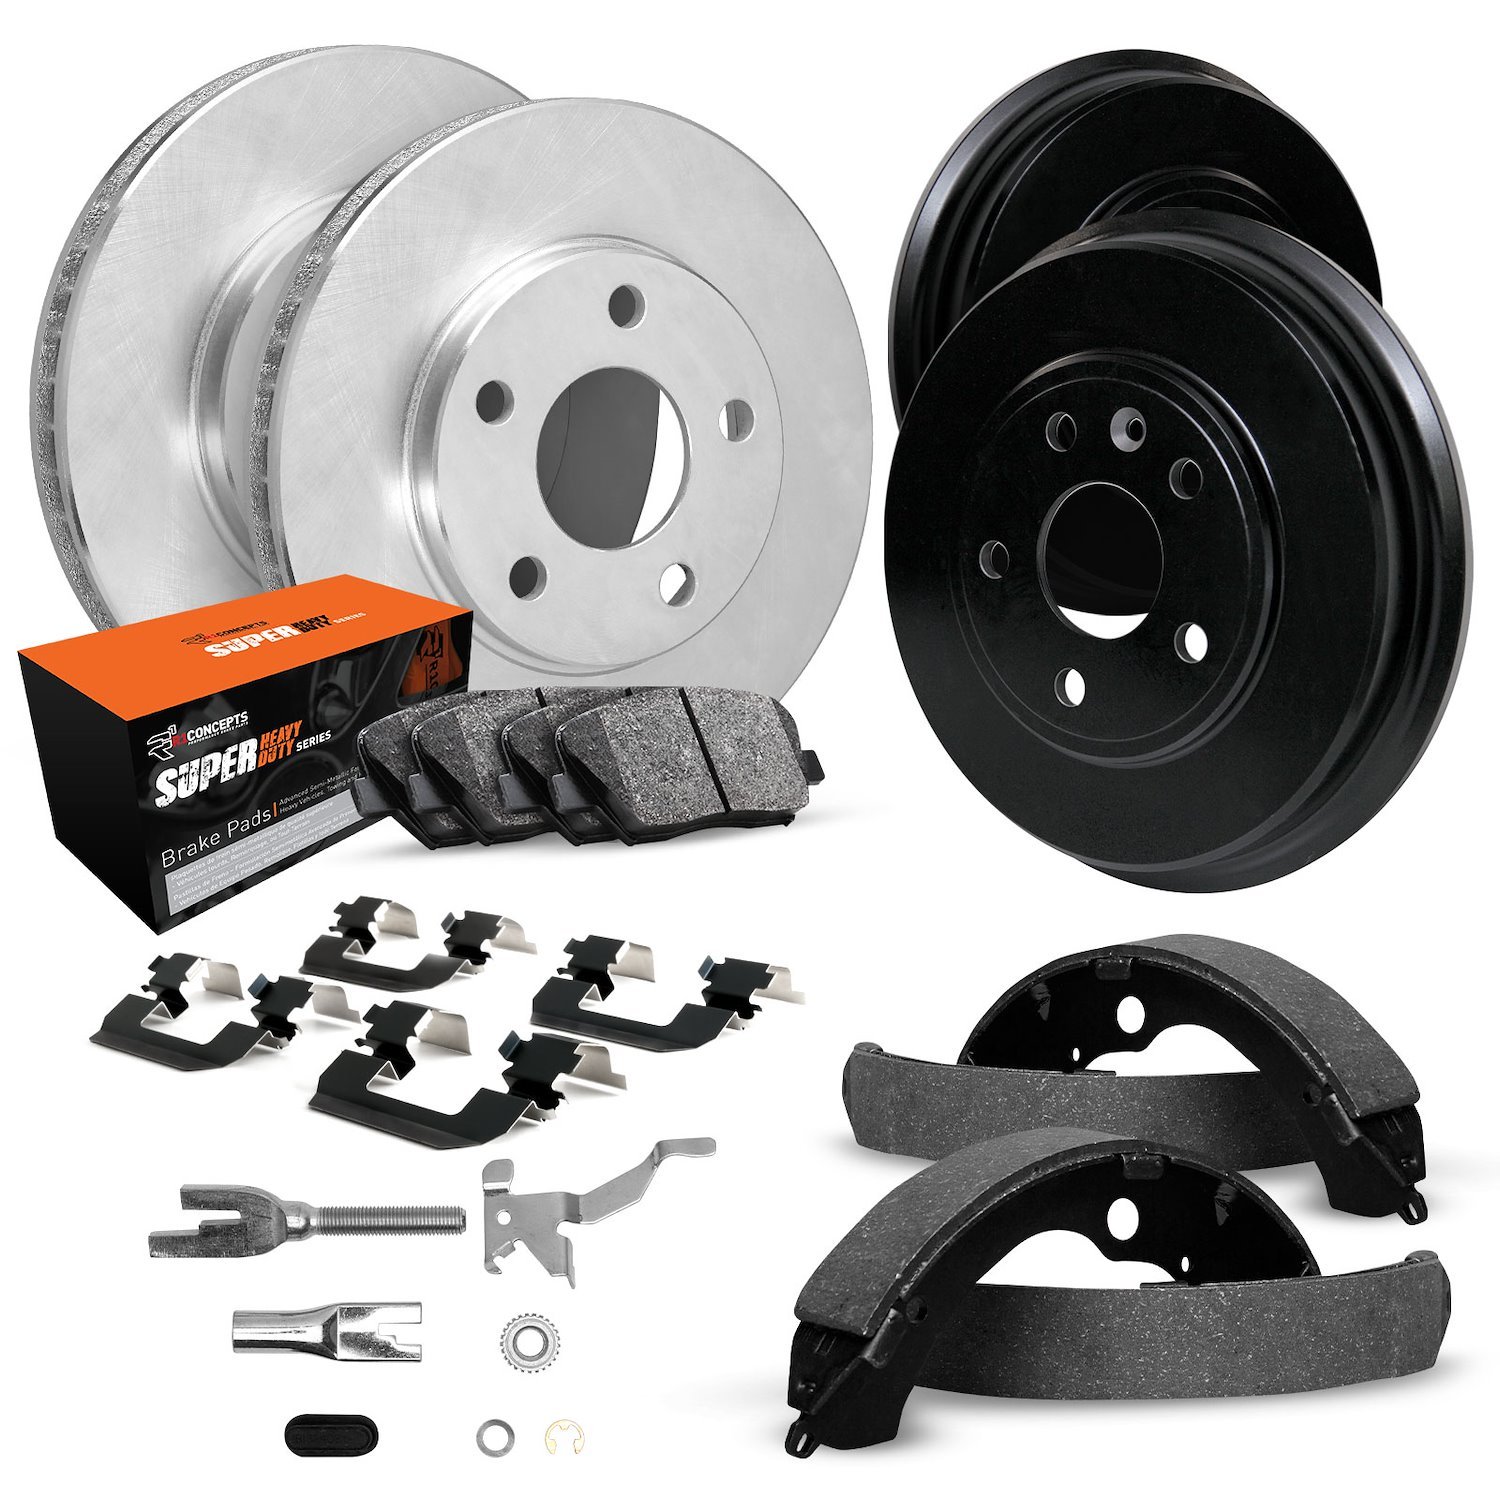 E-Line Blank Brake Rotor & Drum Set w/Super-Duty Pads, Shoes, Hardware, & Adjusters, 2005-2005 GM, Position: Front & Rear